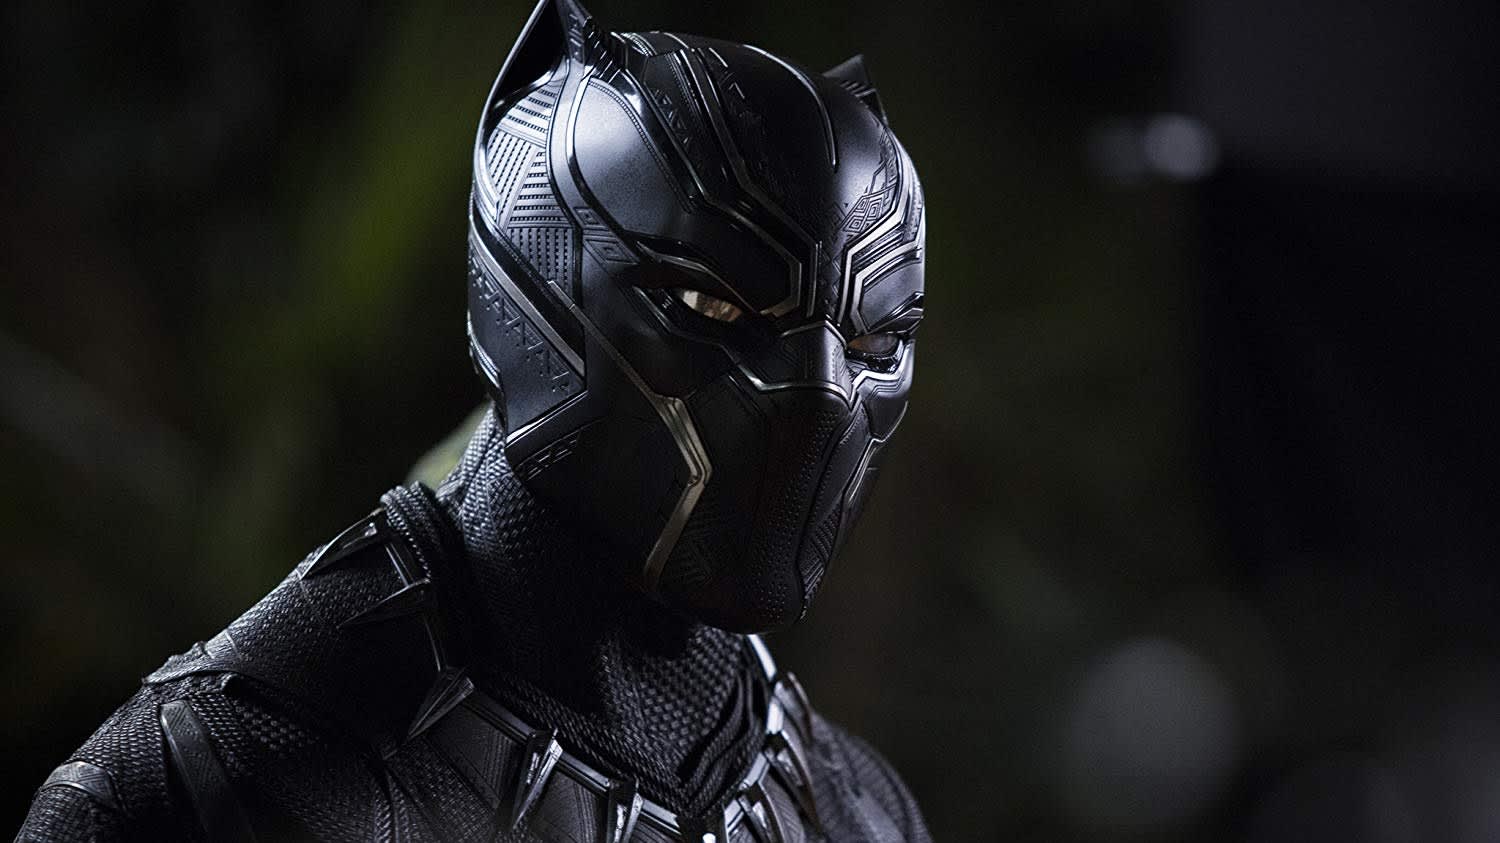 Marvel's 'Black Panther' sequel will start shooting in July, report says